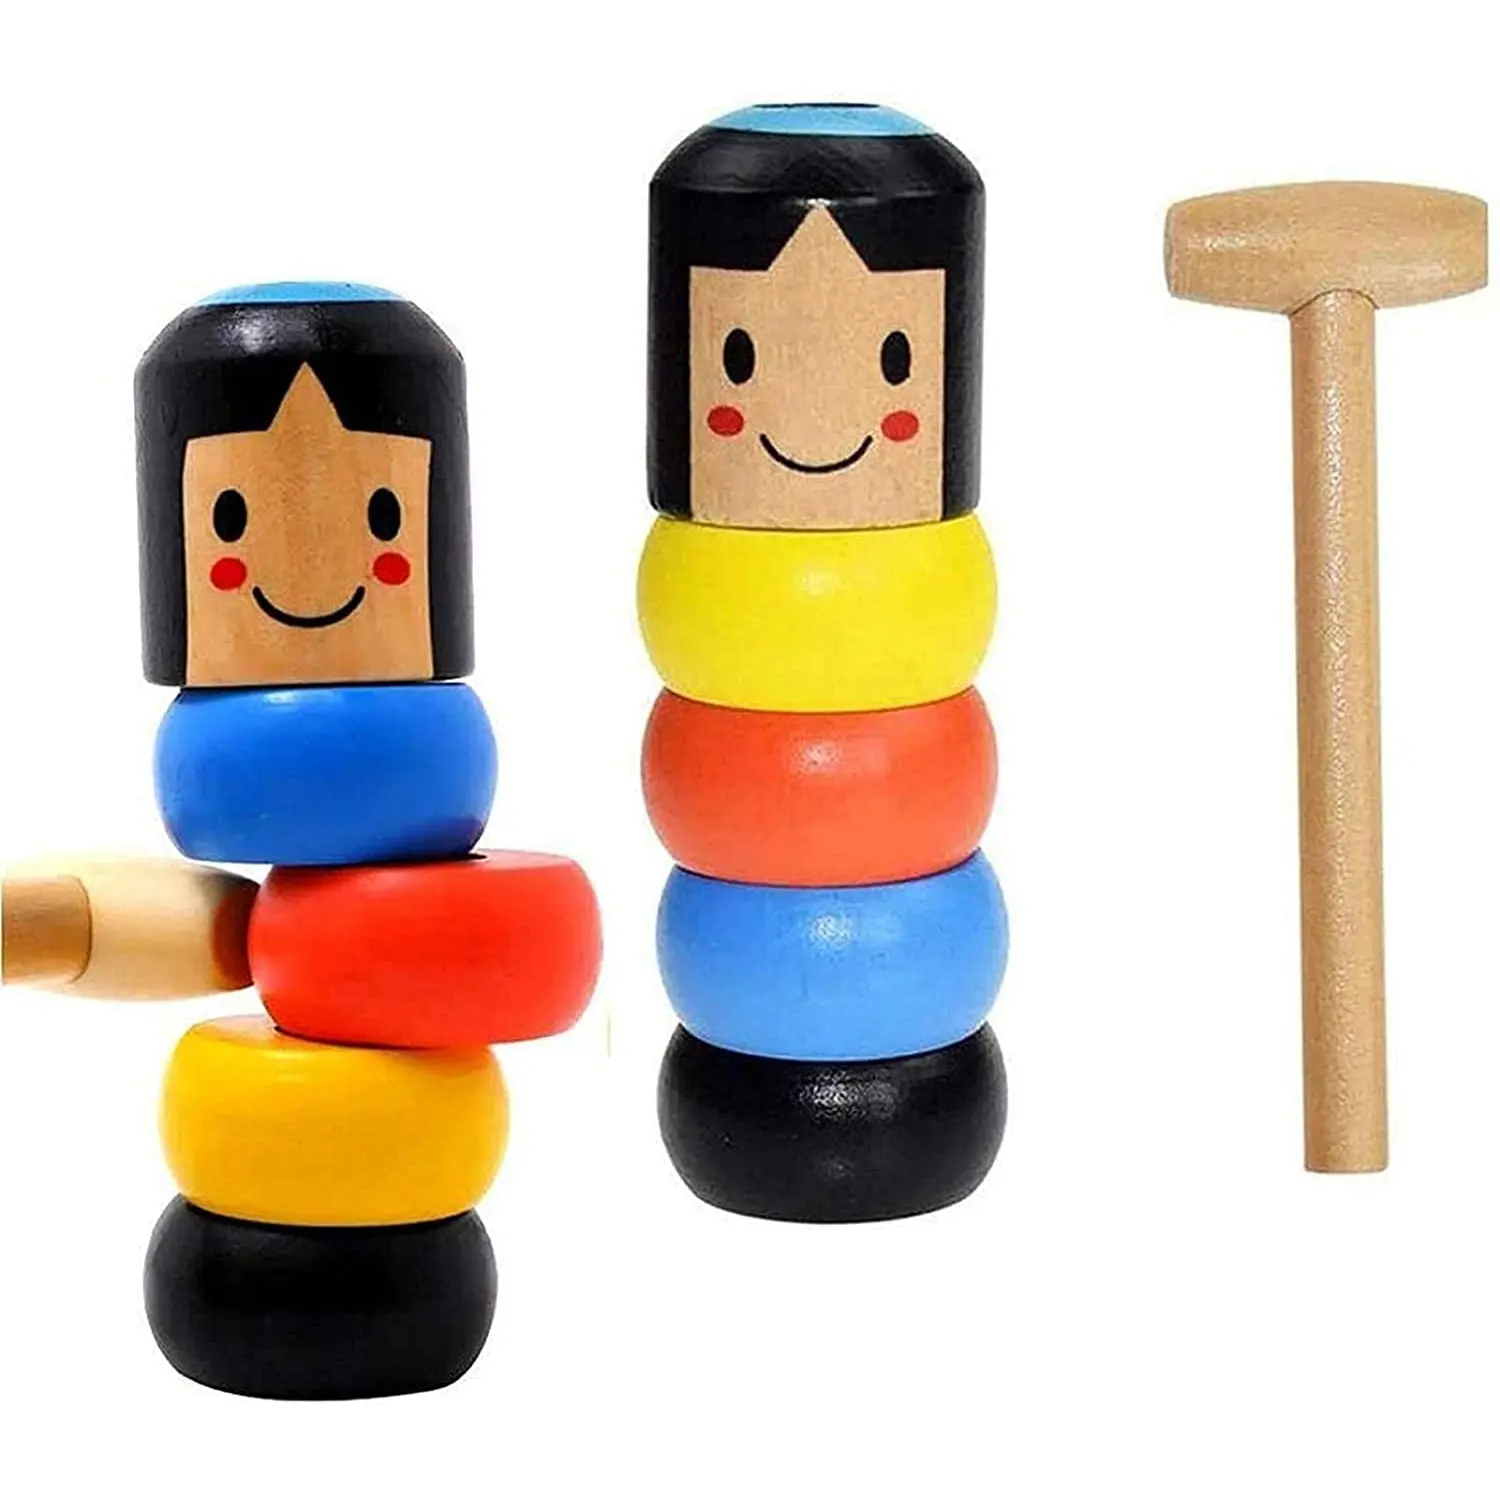 Fun unbreakable little wooden man toy magnetic wooden man magic toy children's educational toys